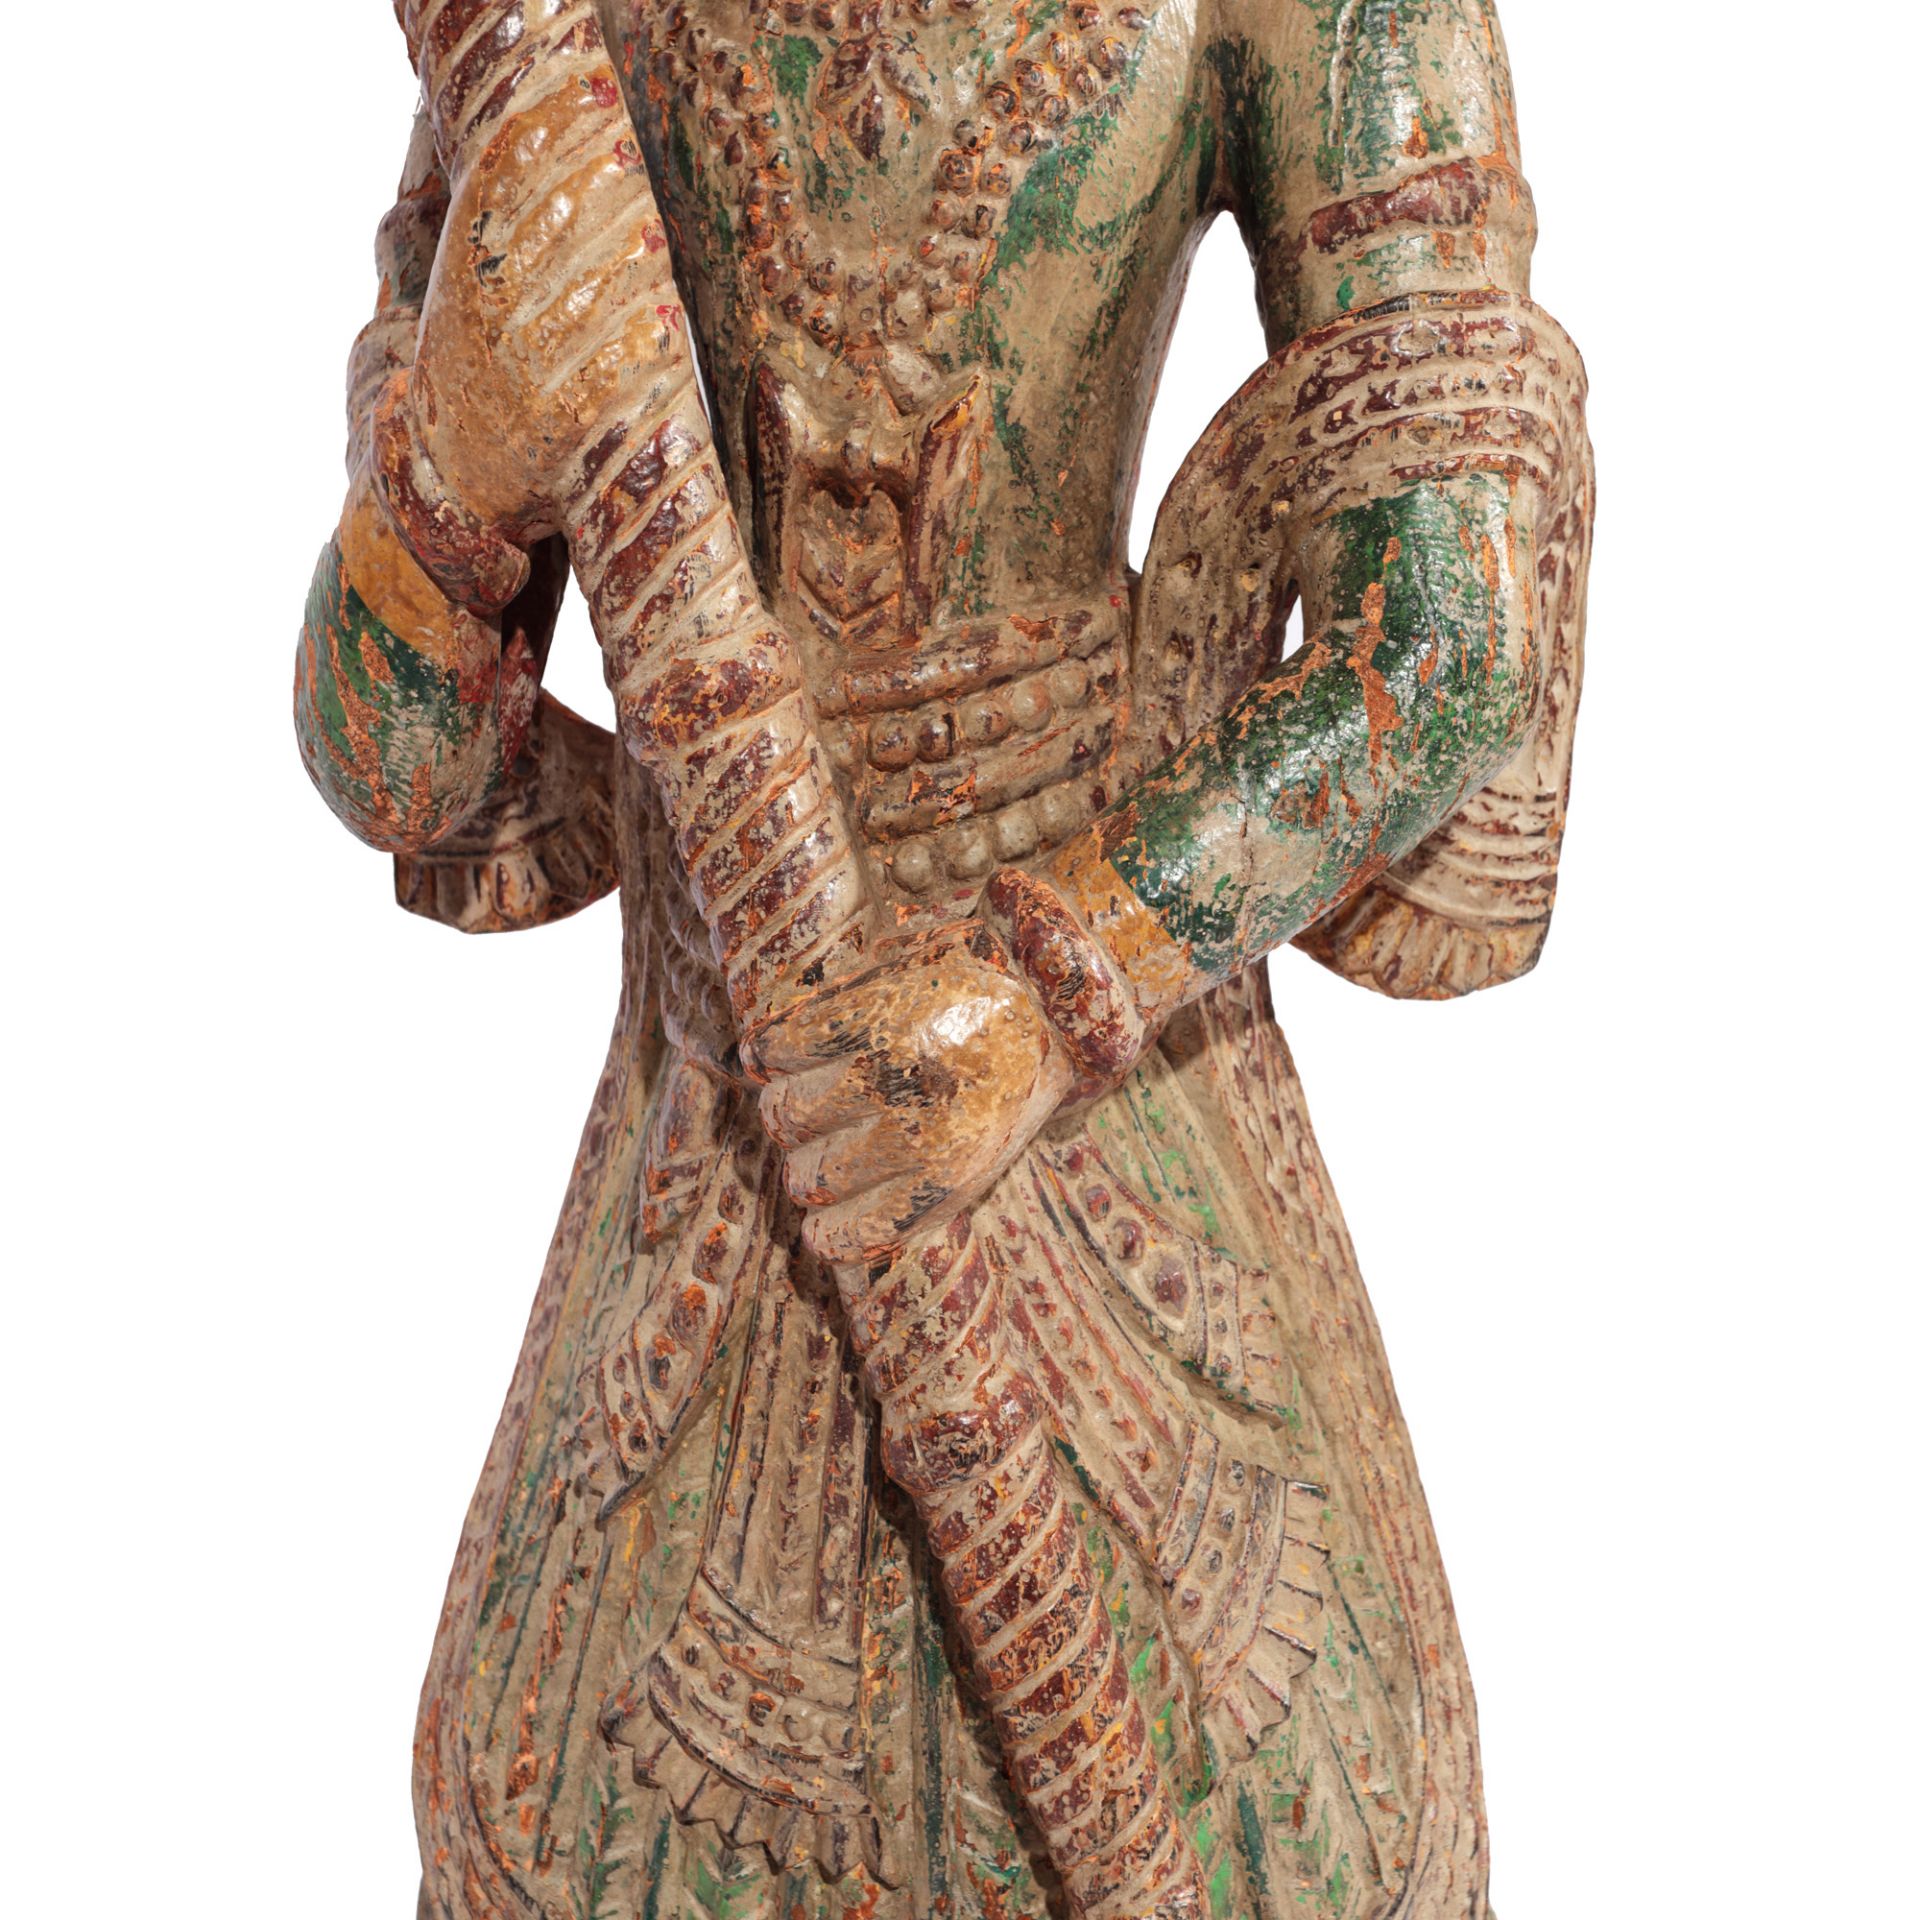 Indo-Persian statuette, painted wood, depicting a fighter, possibly early 19th century - Image 4 of 4